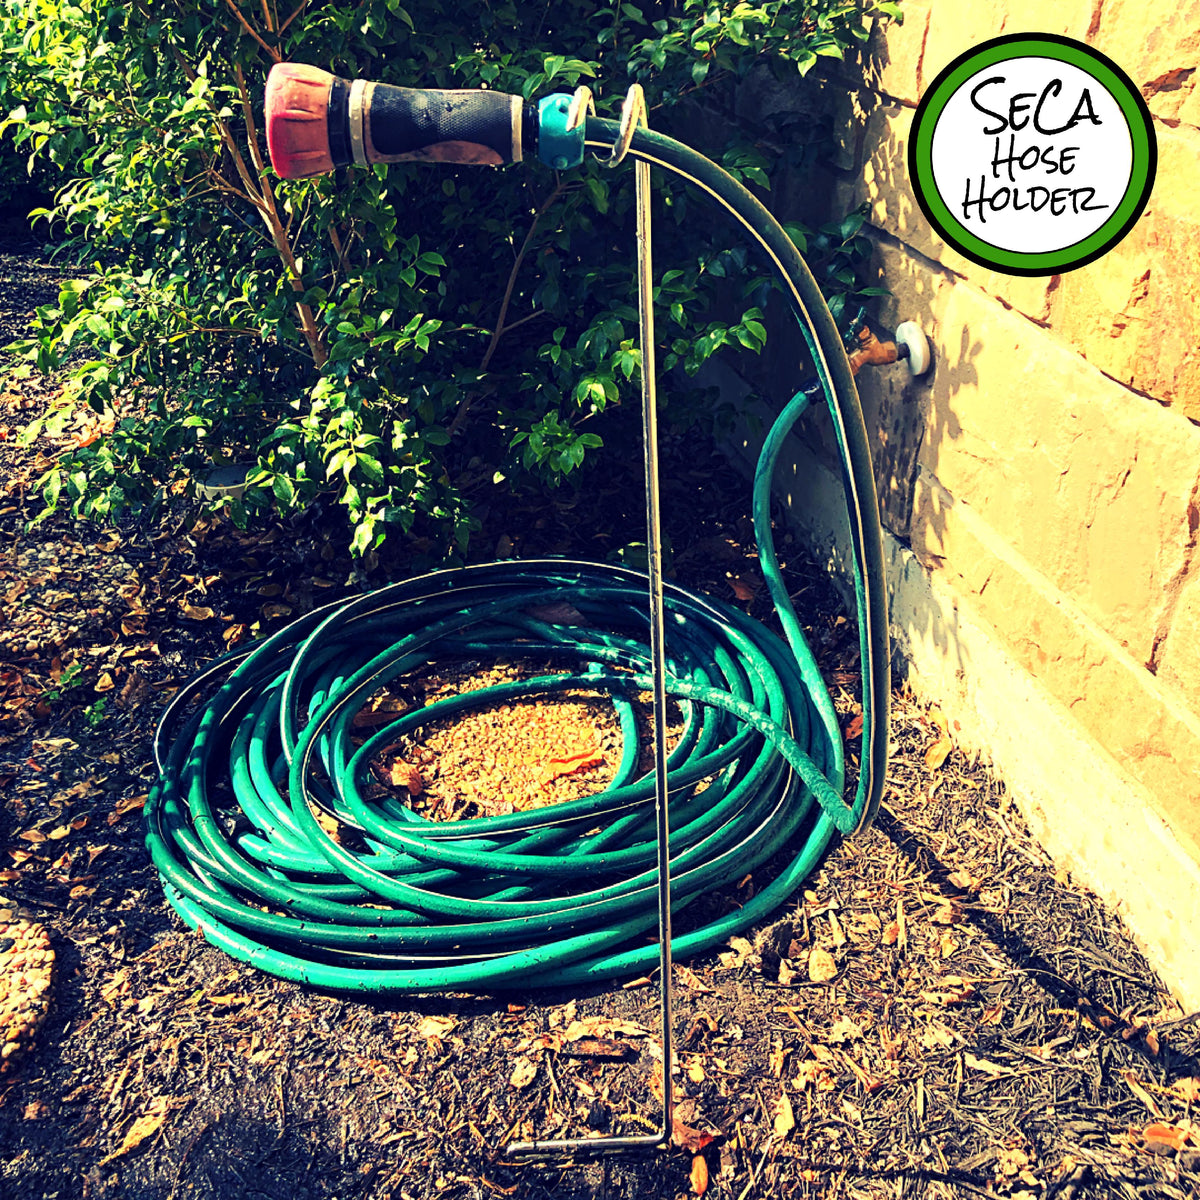 Hands-Free, Hassle Free Water Hose Holder for the Home & Garden; Gardening, Garden Tools